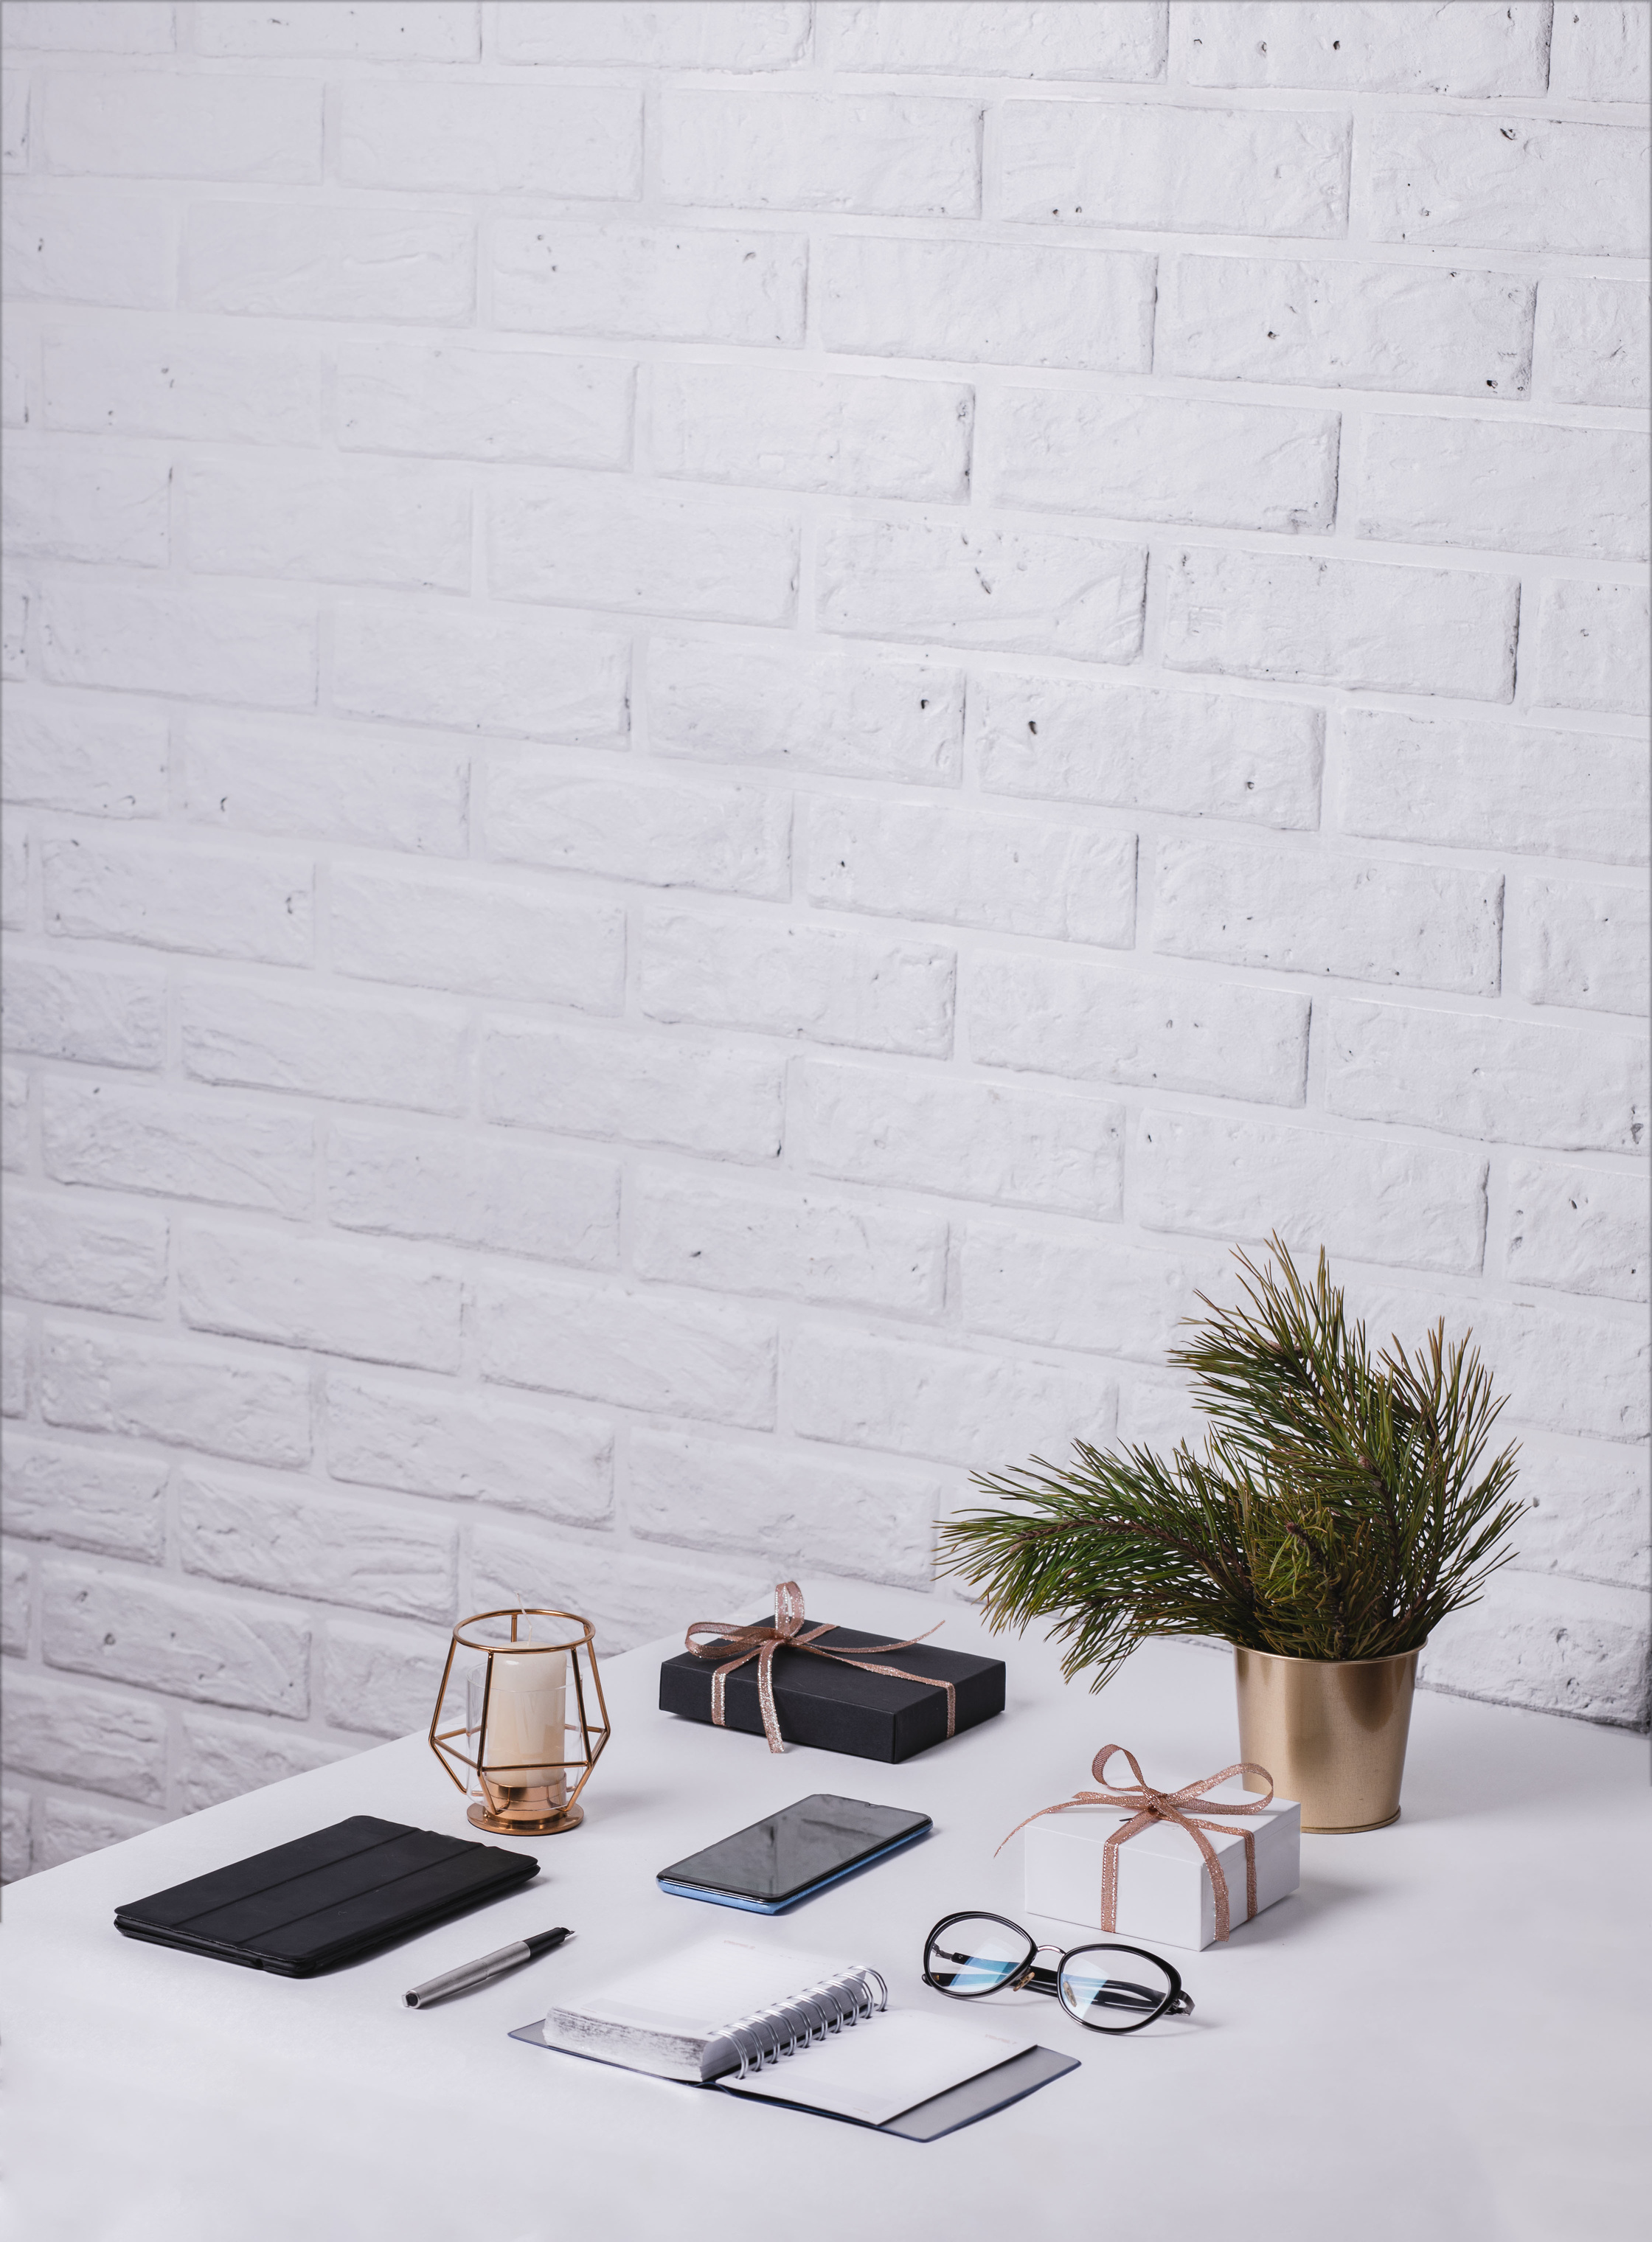 Office Work Accessories on Desk with White Brick Background